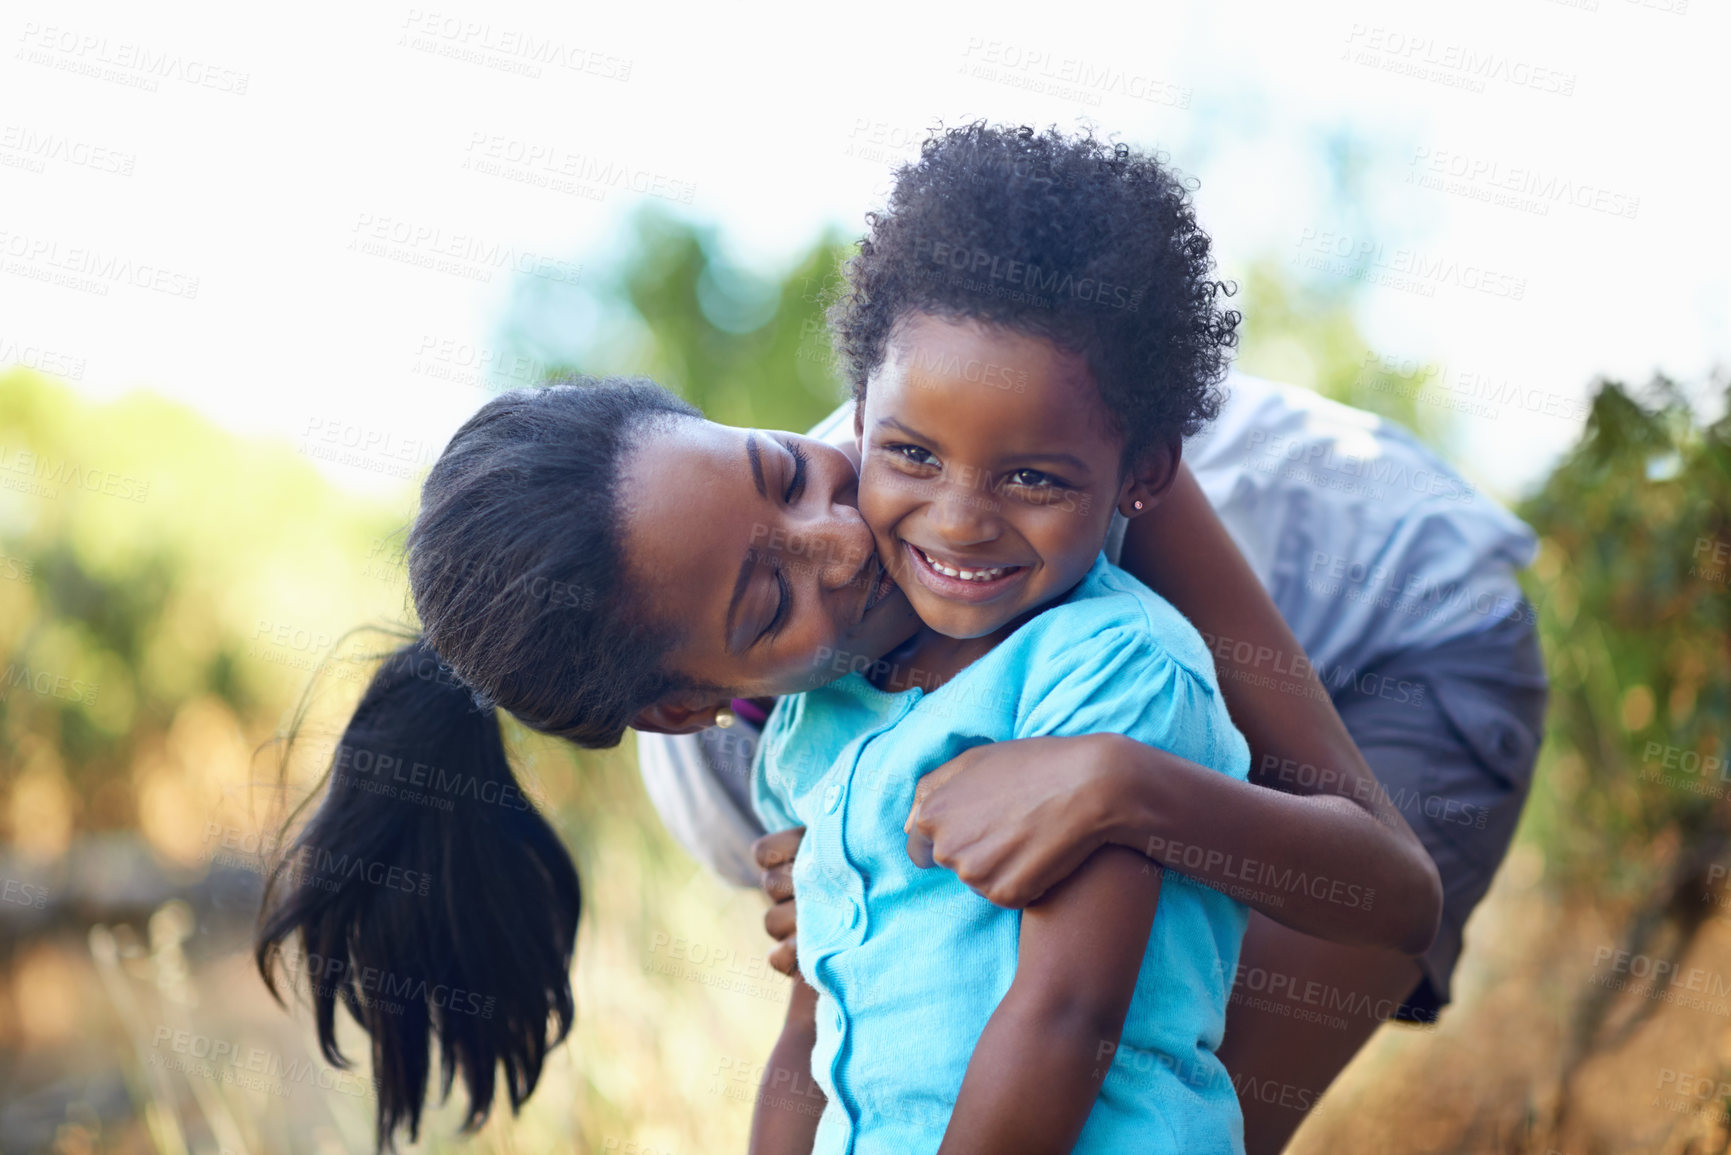 Buy stock photo Child, kiss or mother hiking in forest to relax or bond on holiday vacation together in nature. Kid, African mom or happy black family in woods trekking on outdoor adventure with smile, love or hug